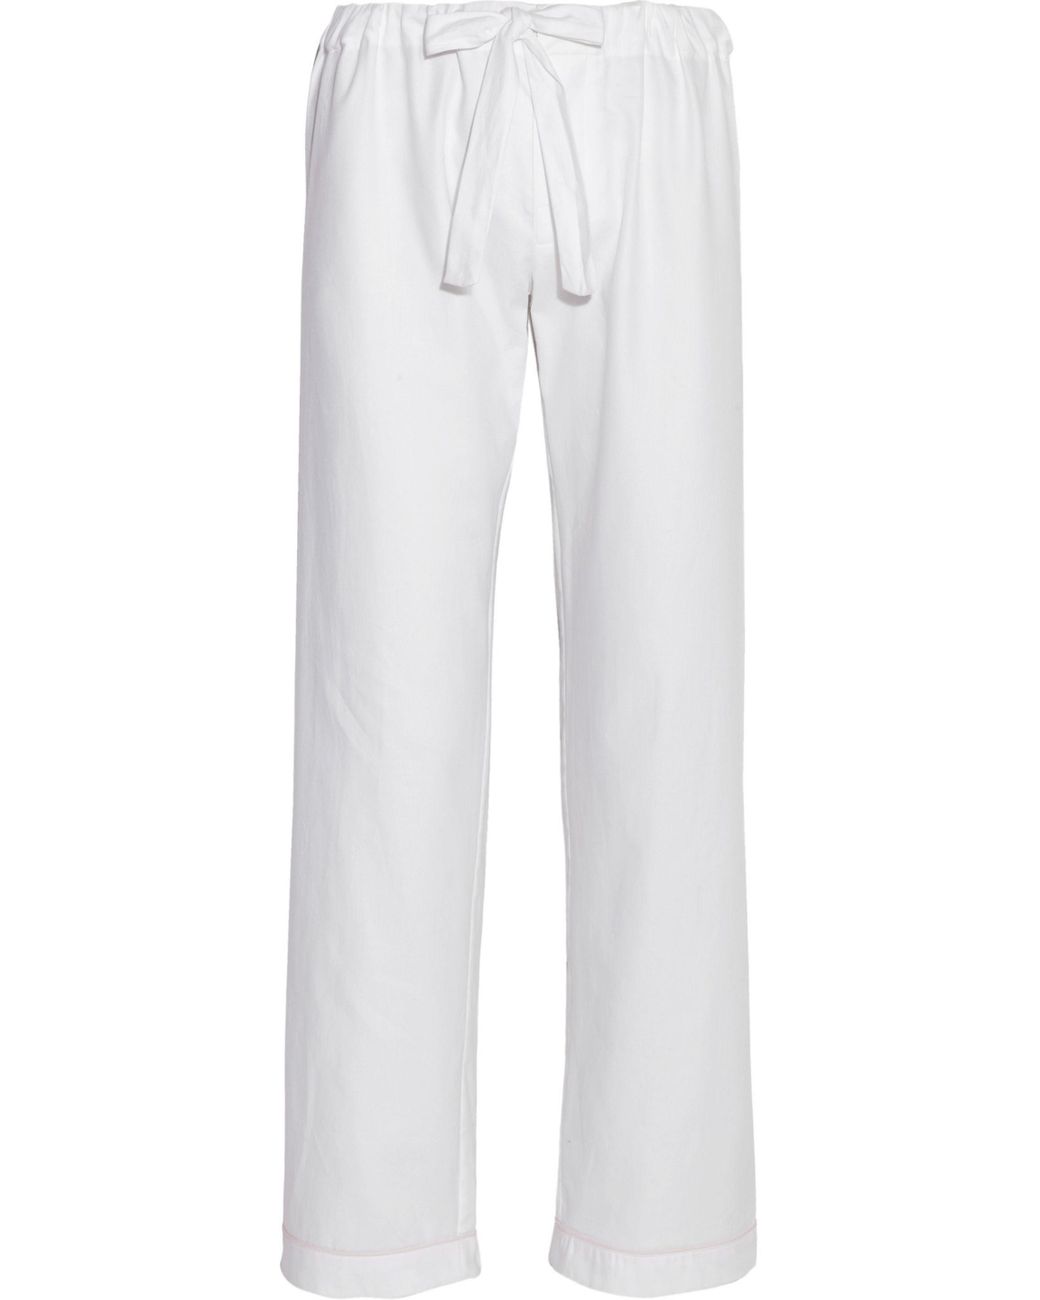 Bodas Cottontwill Pajama Pants in White | Lyst